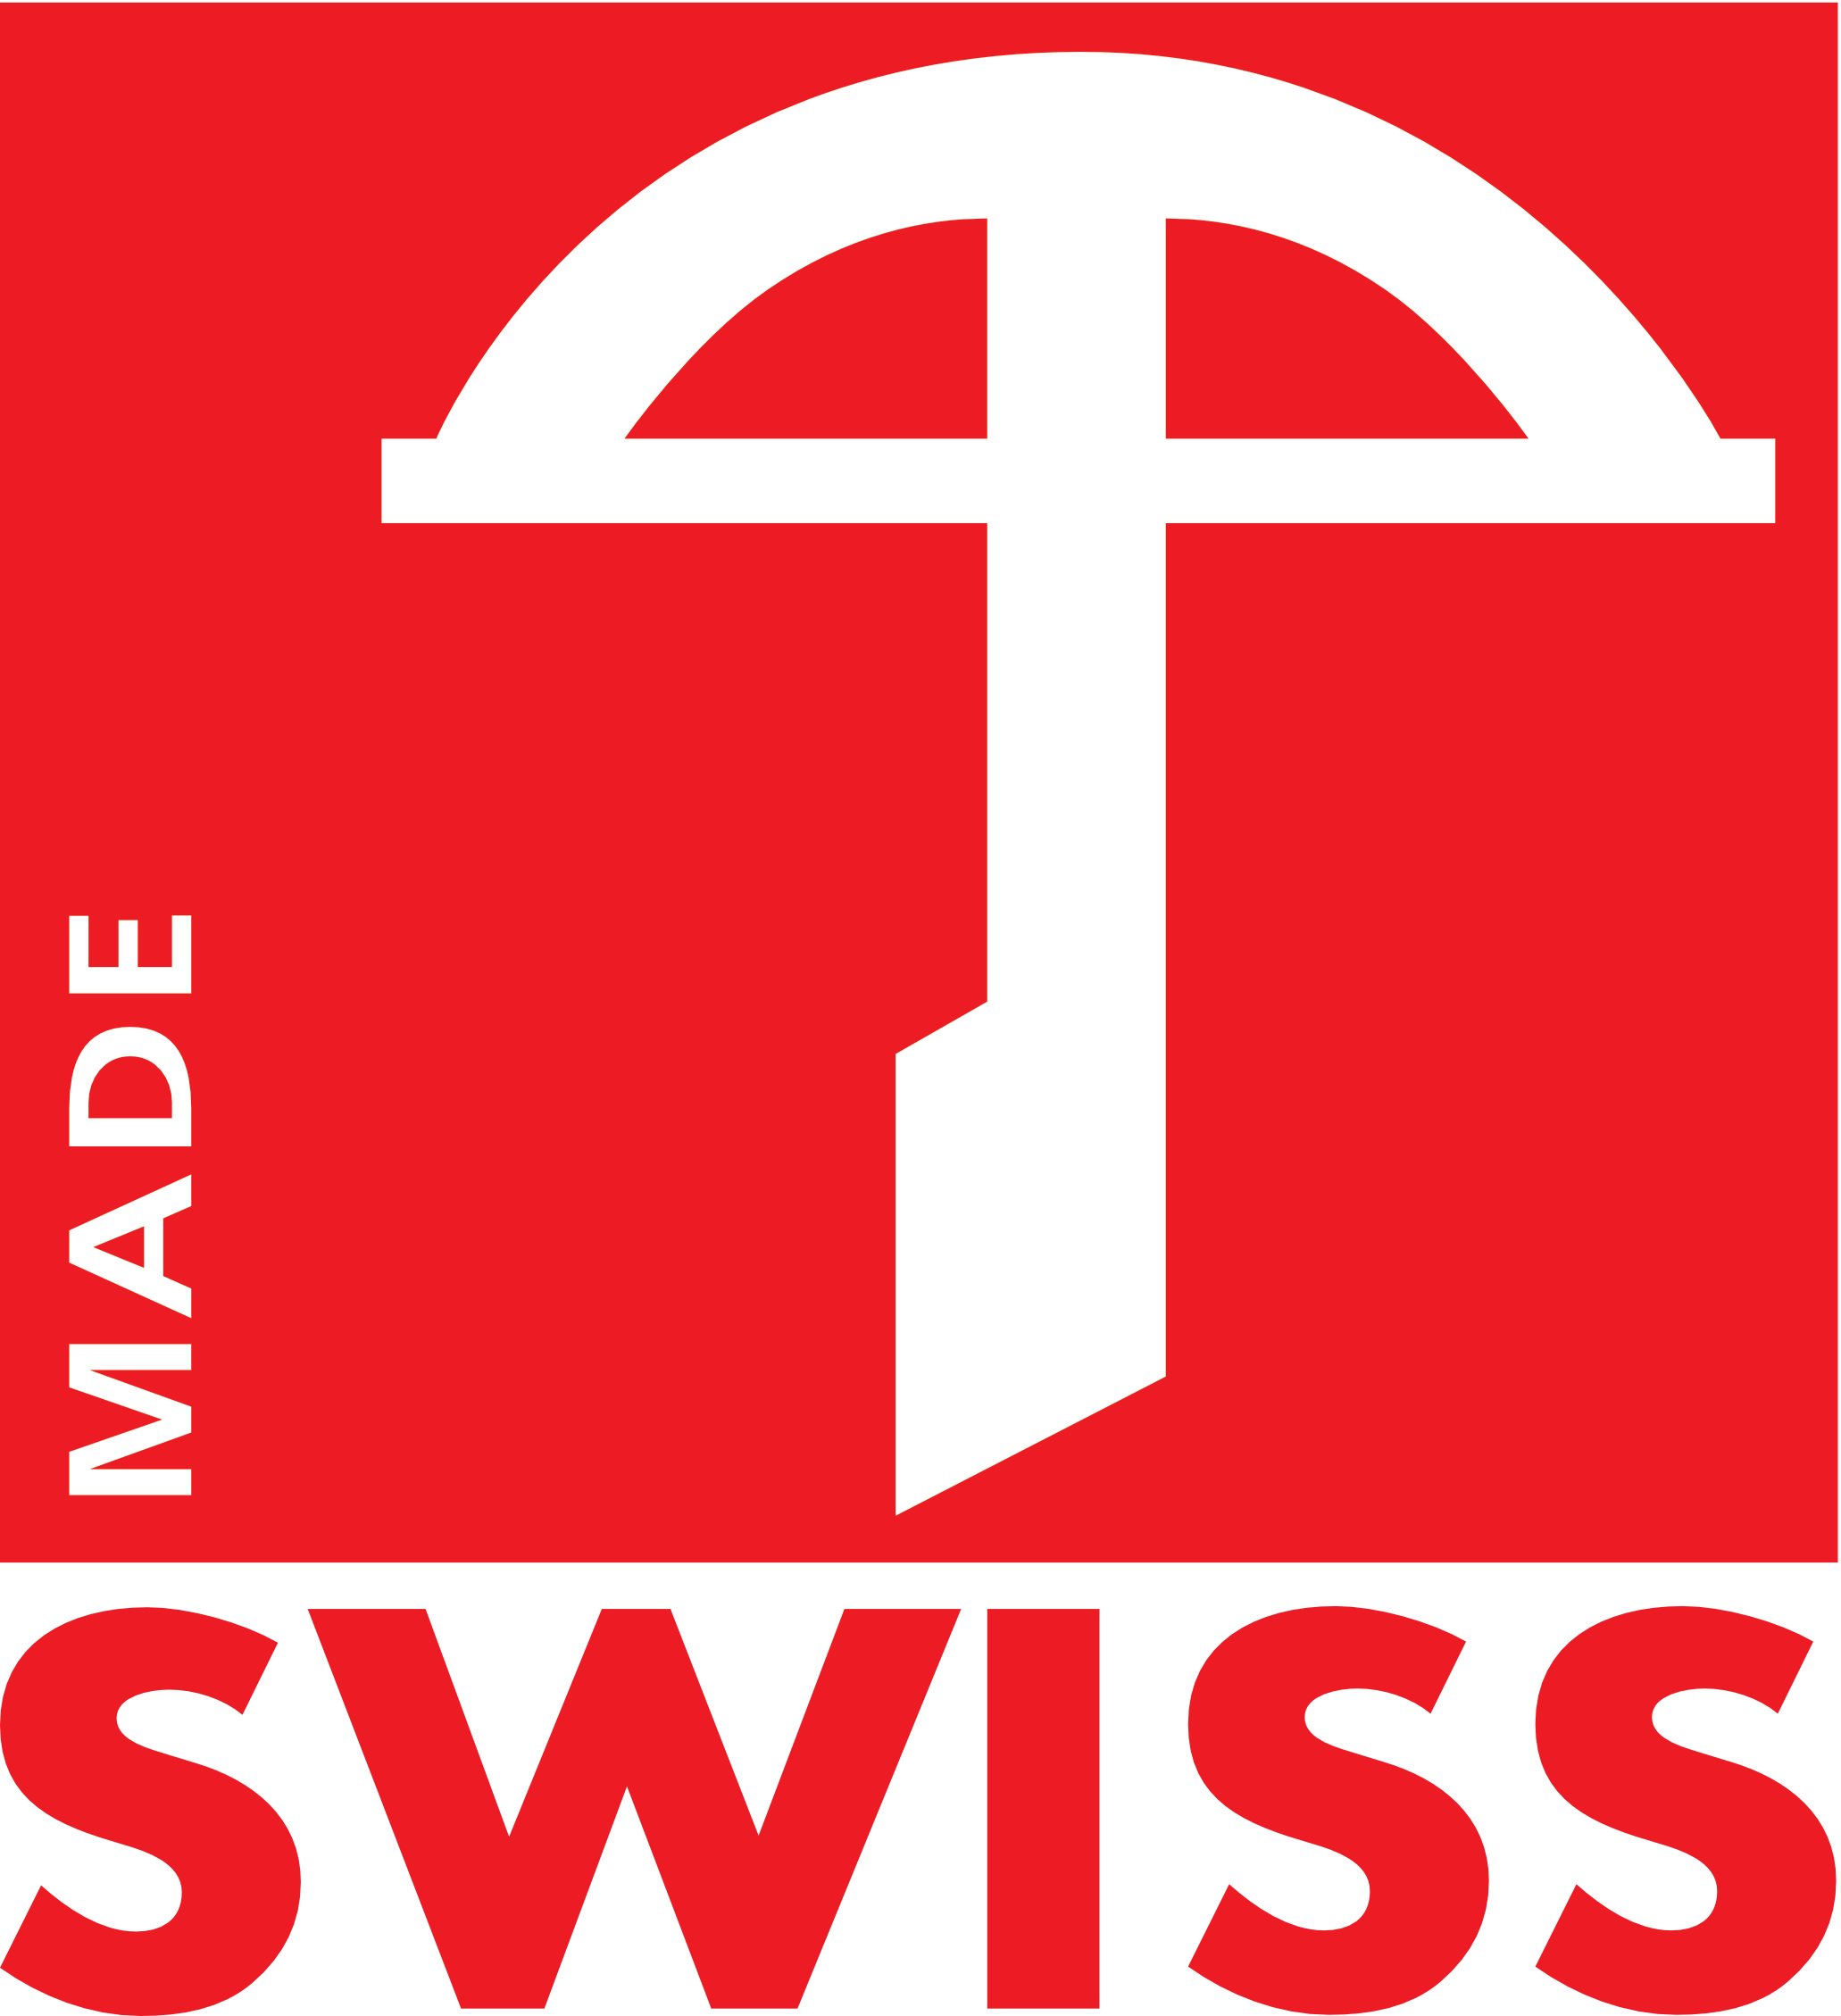 image-11671415-logo_swiss_label_png-aab32.png